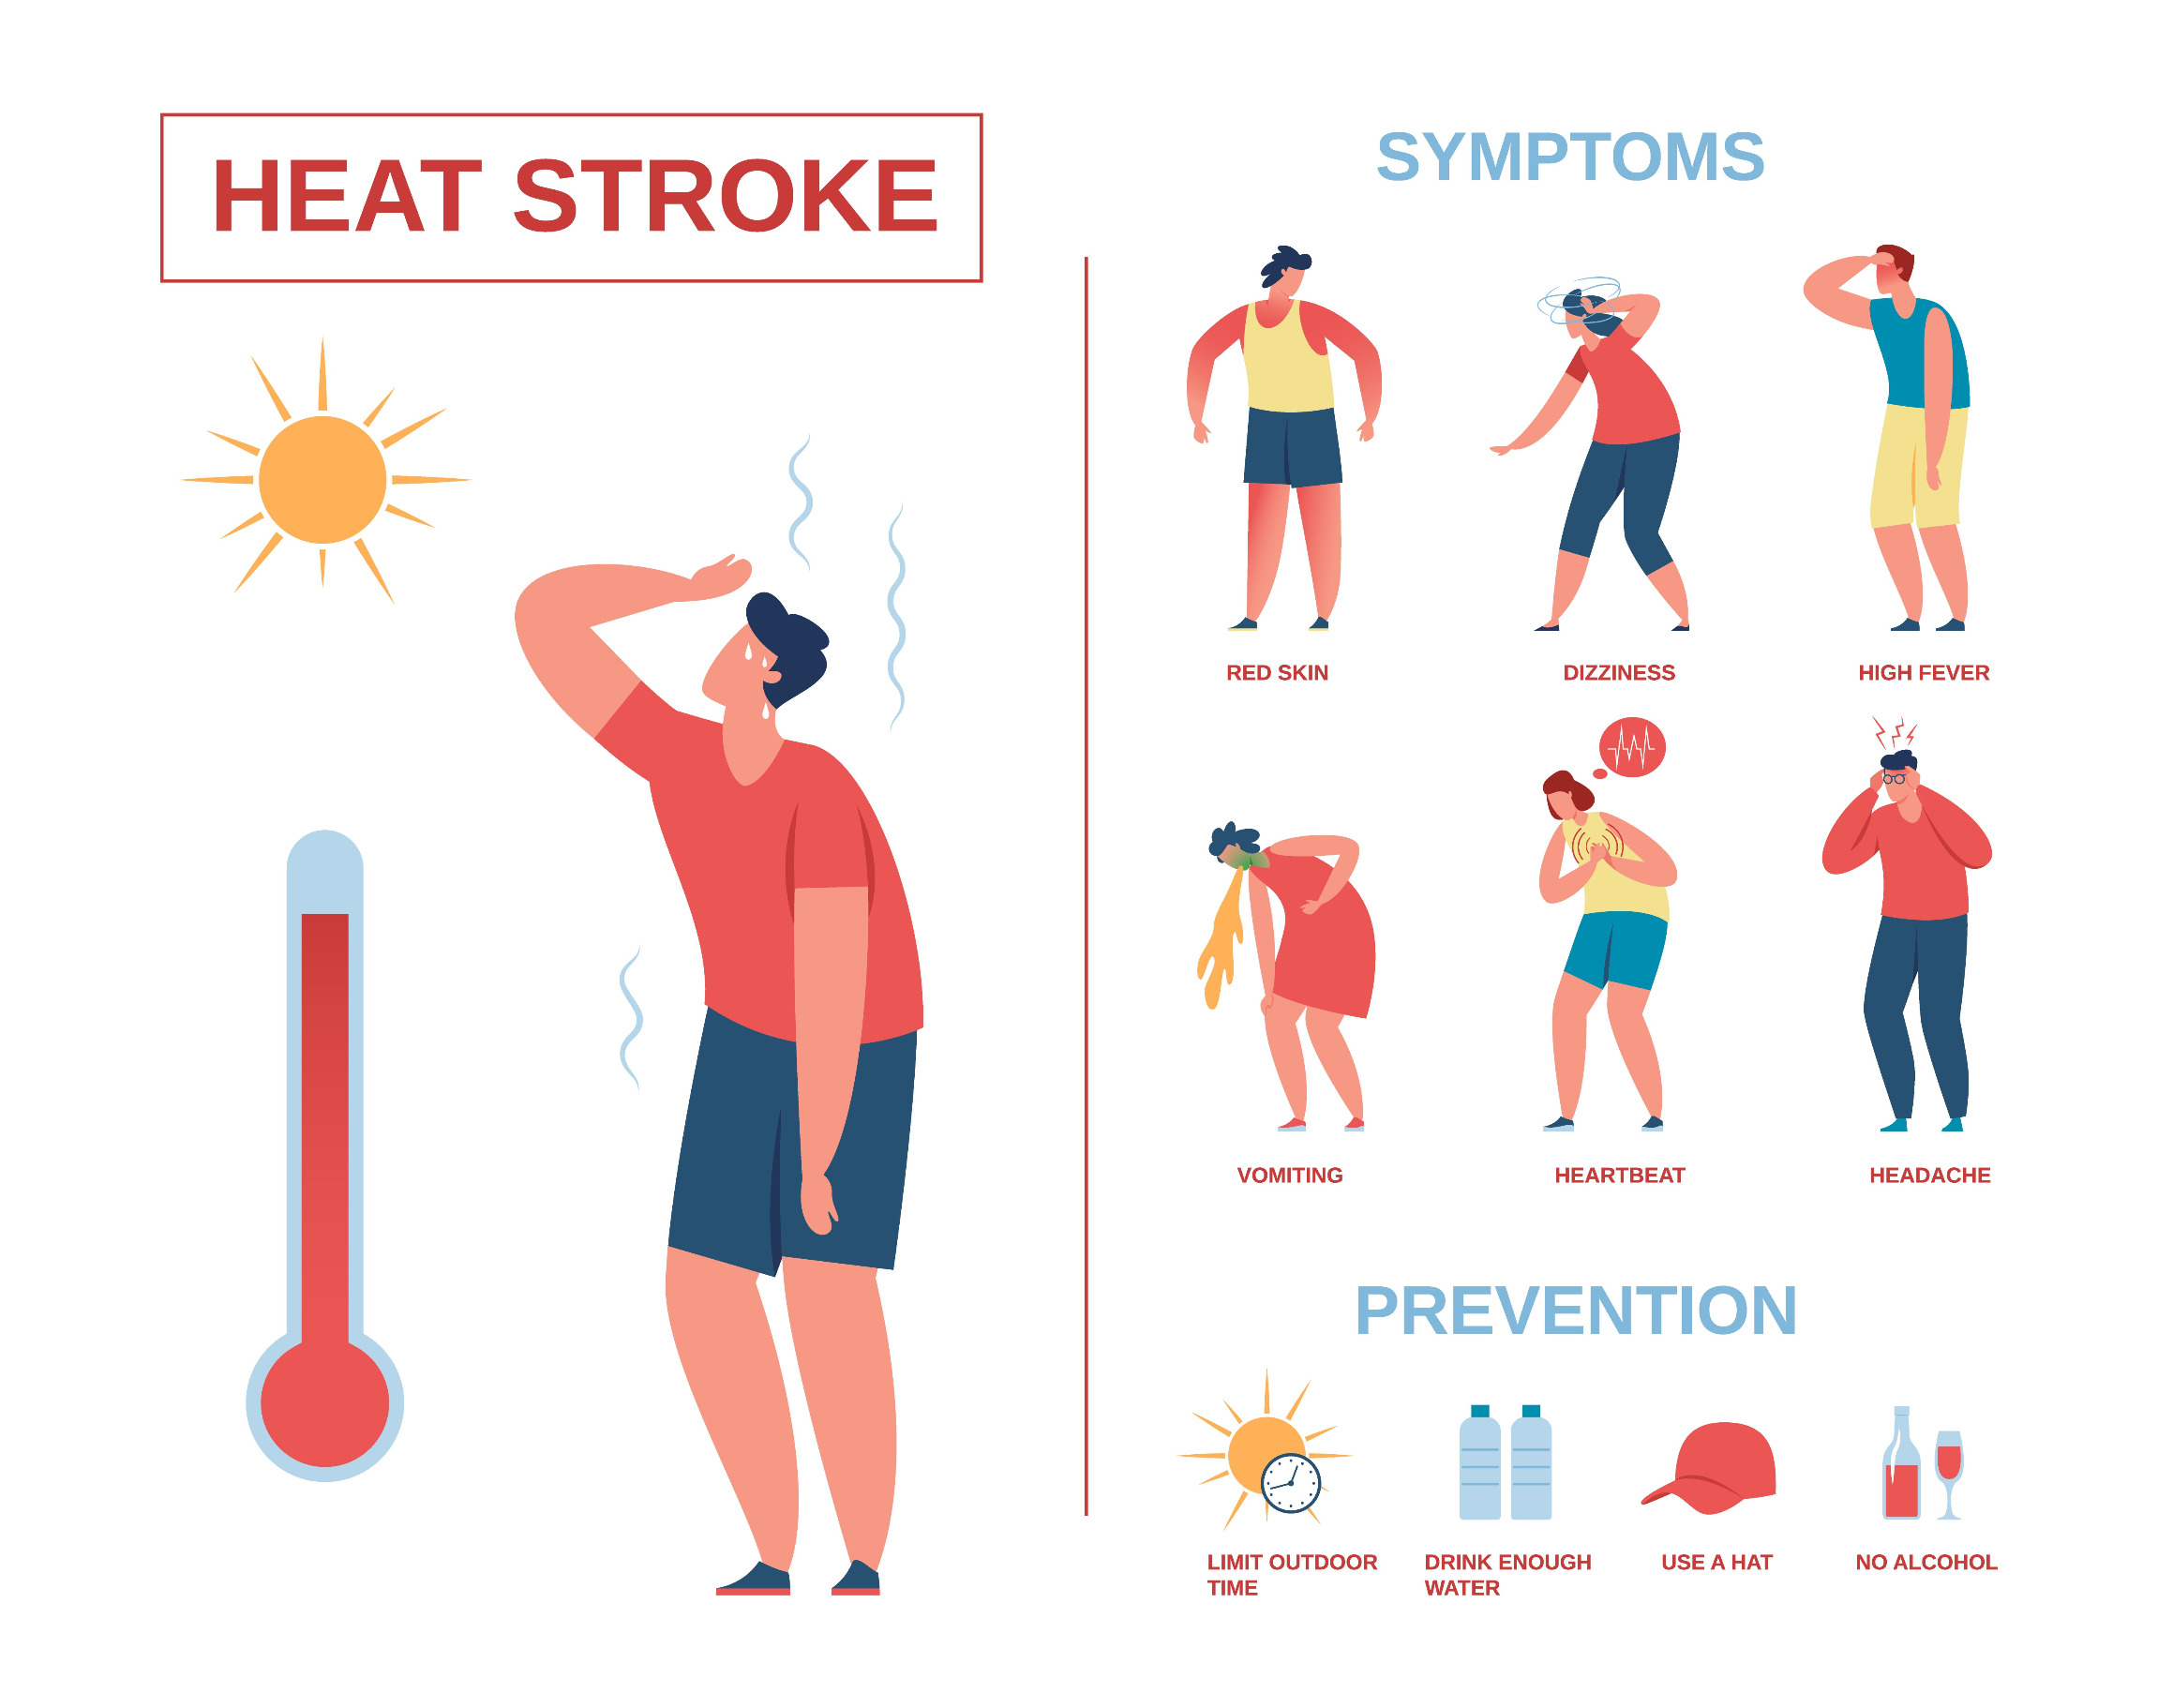 Heat stroke symptoms and prevention infographic